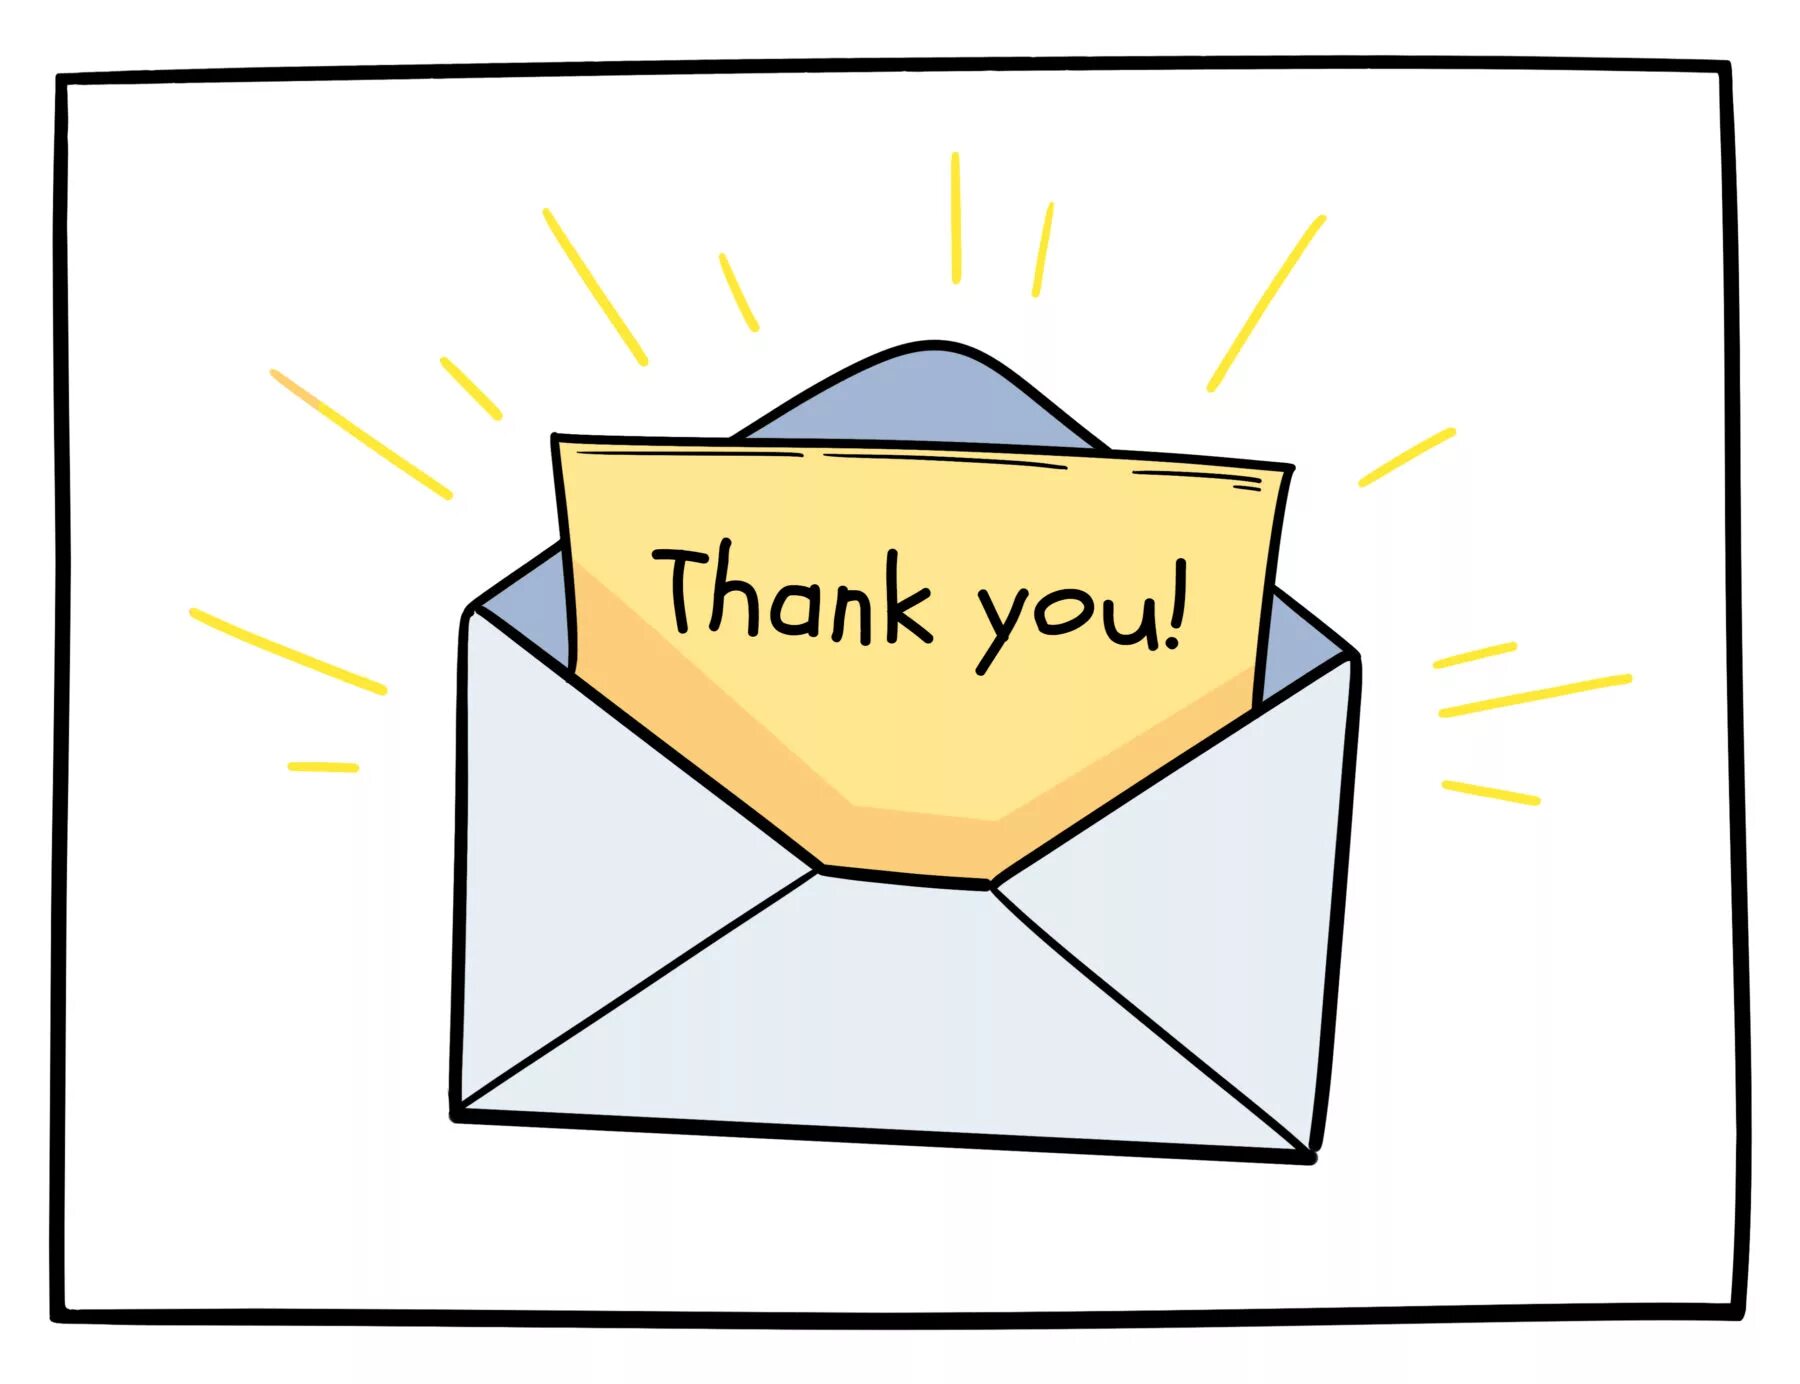 Thank you email. Thank you картинки. Write "a thank you email". Картинки a thank - you Letter and. Thanks send message